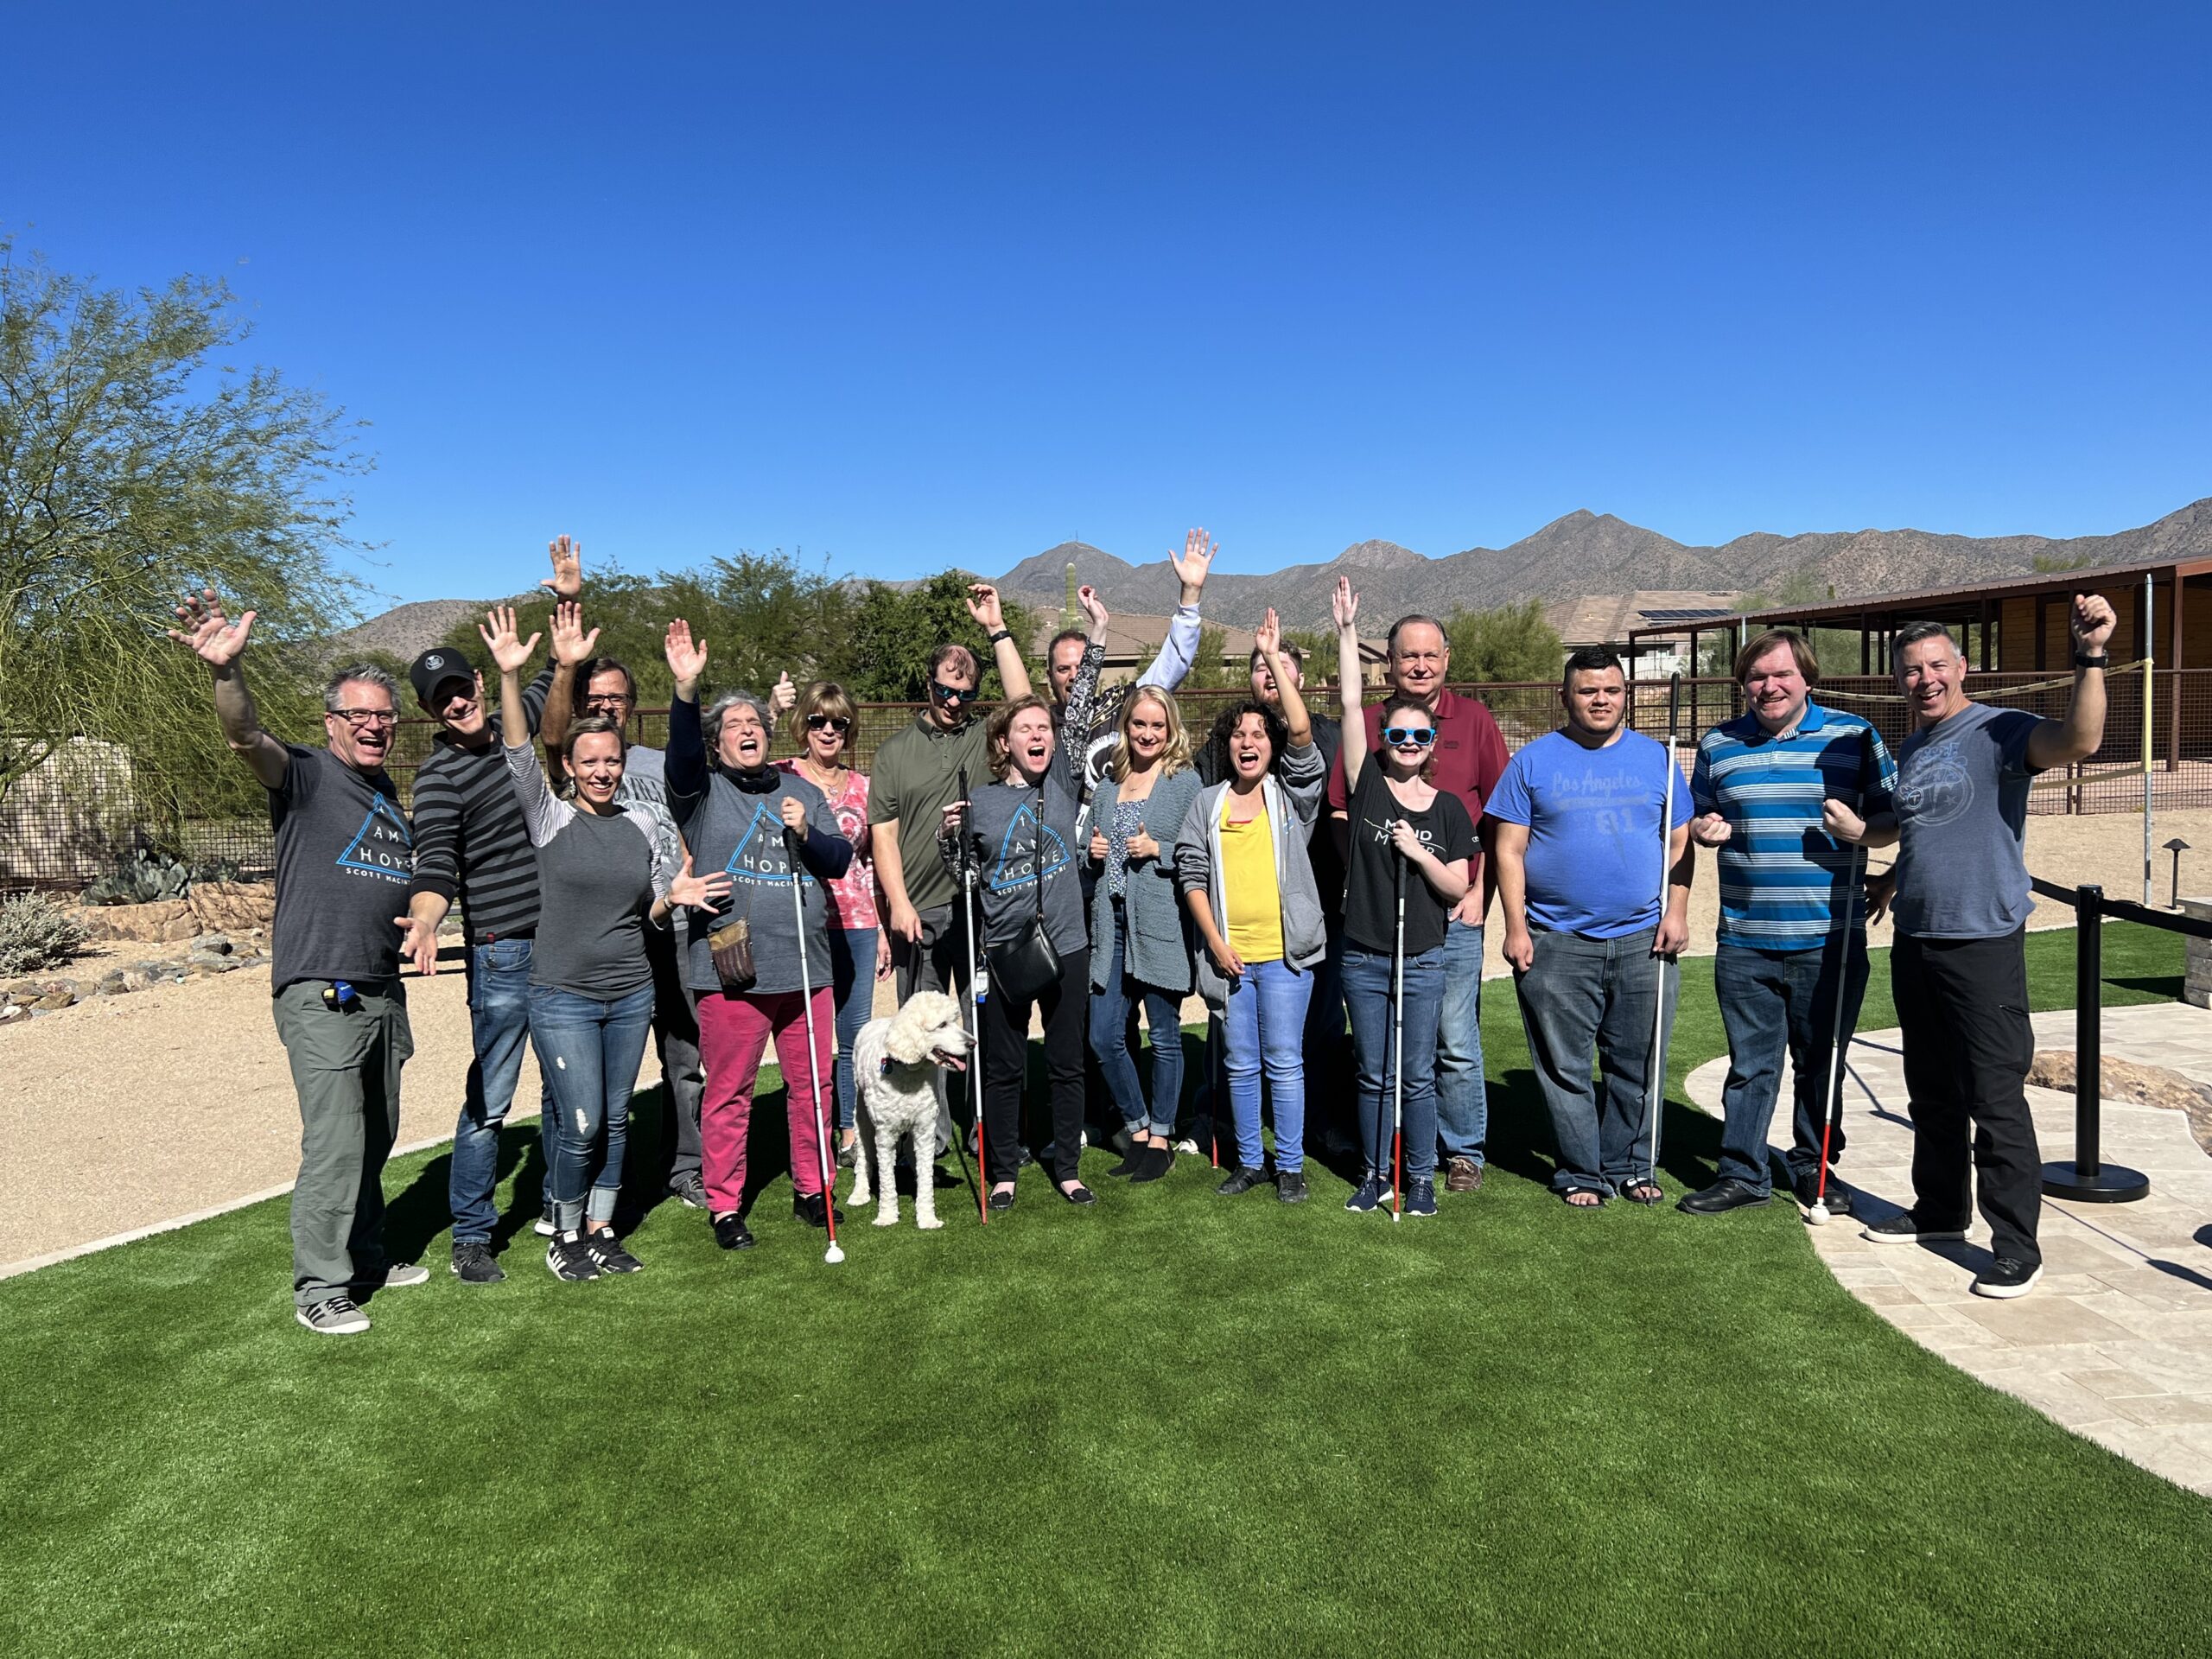 Group photo of the SongSight 2022 participants taken in Scottsdale, Arizona.